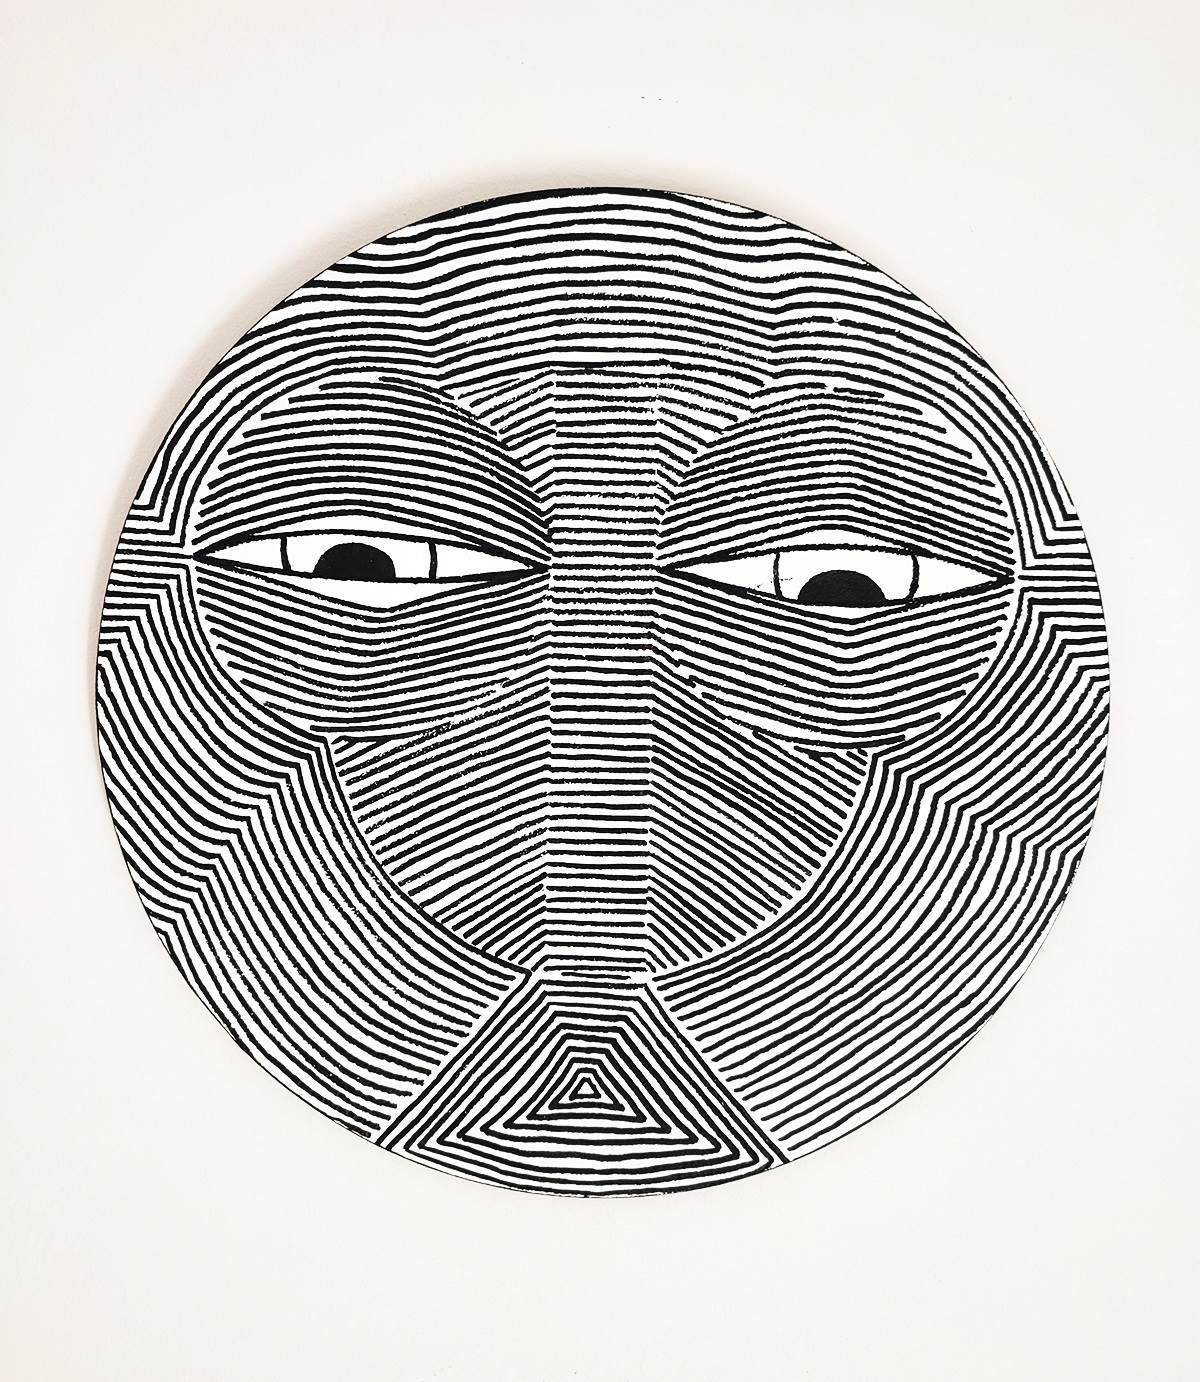 Lines Masks III, original   Drawing and Illustration by Inês  Sousa Cardoso